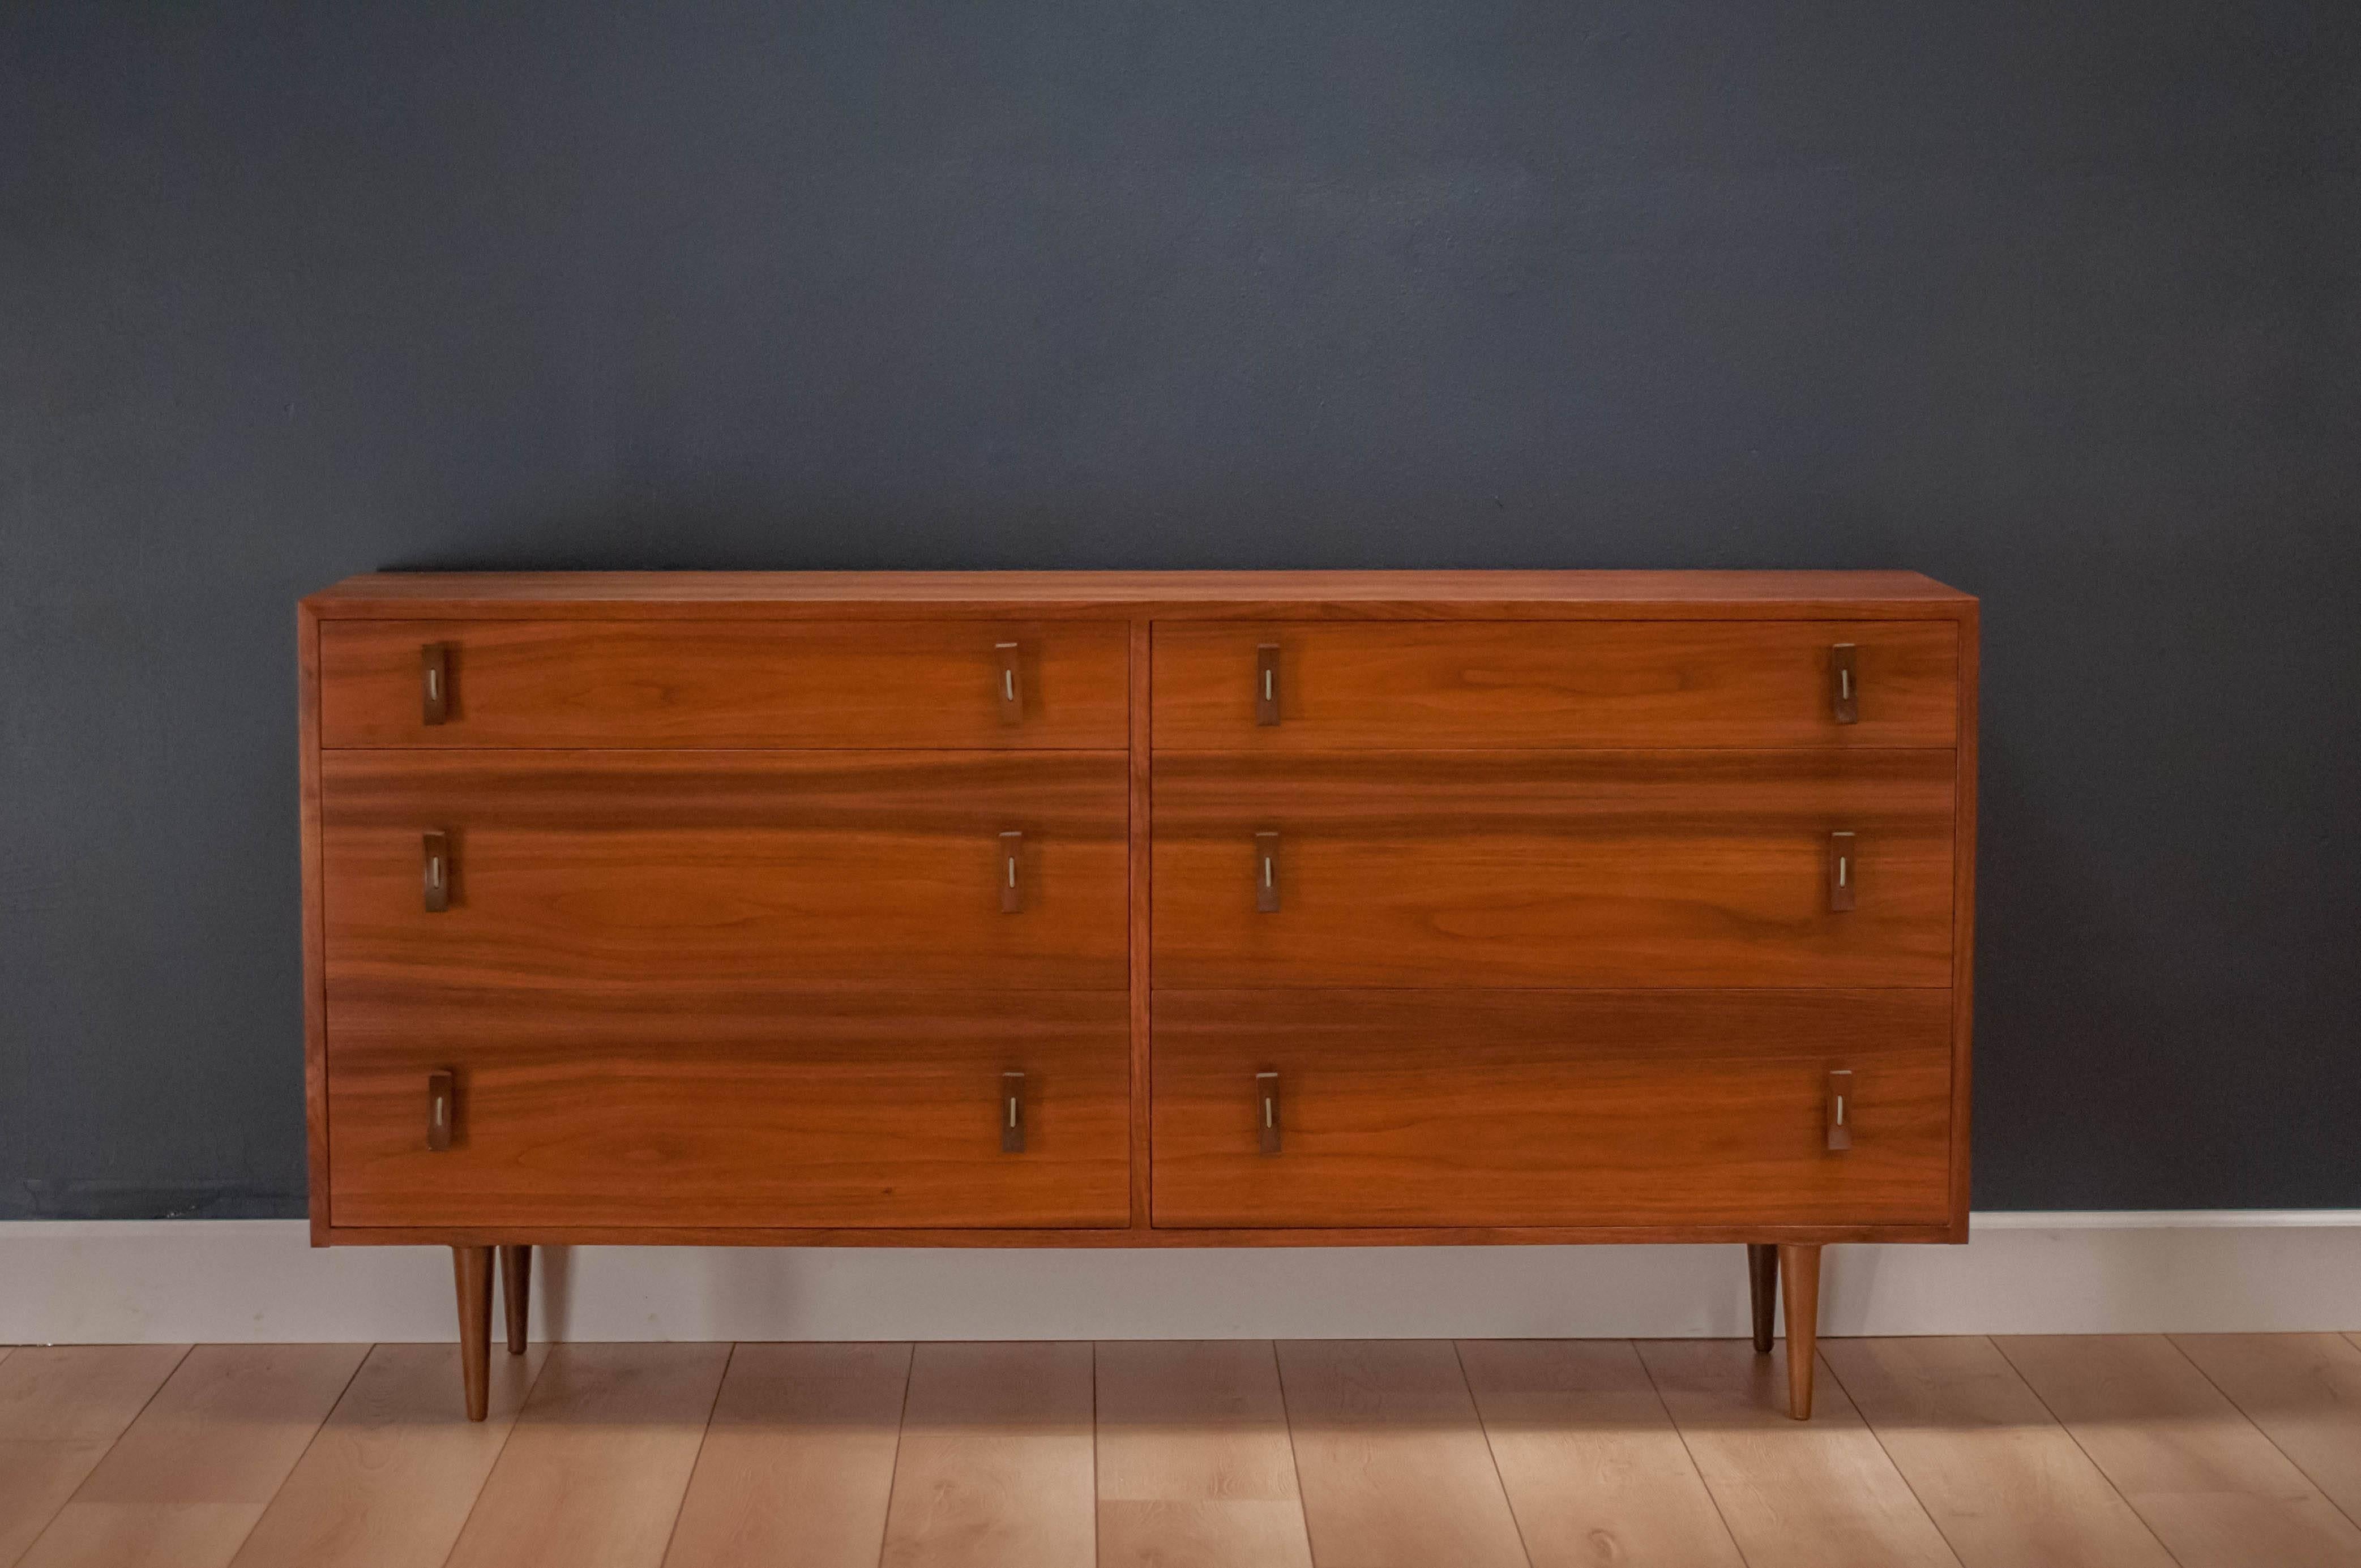 Mid-Century Modern Stanley Young dresser for Glenn of California in walnut. This piece features six drawers that provide ample storage space. Drawers are accessorized by the designer's signature walnut and bent metal pulls. Case piece displays